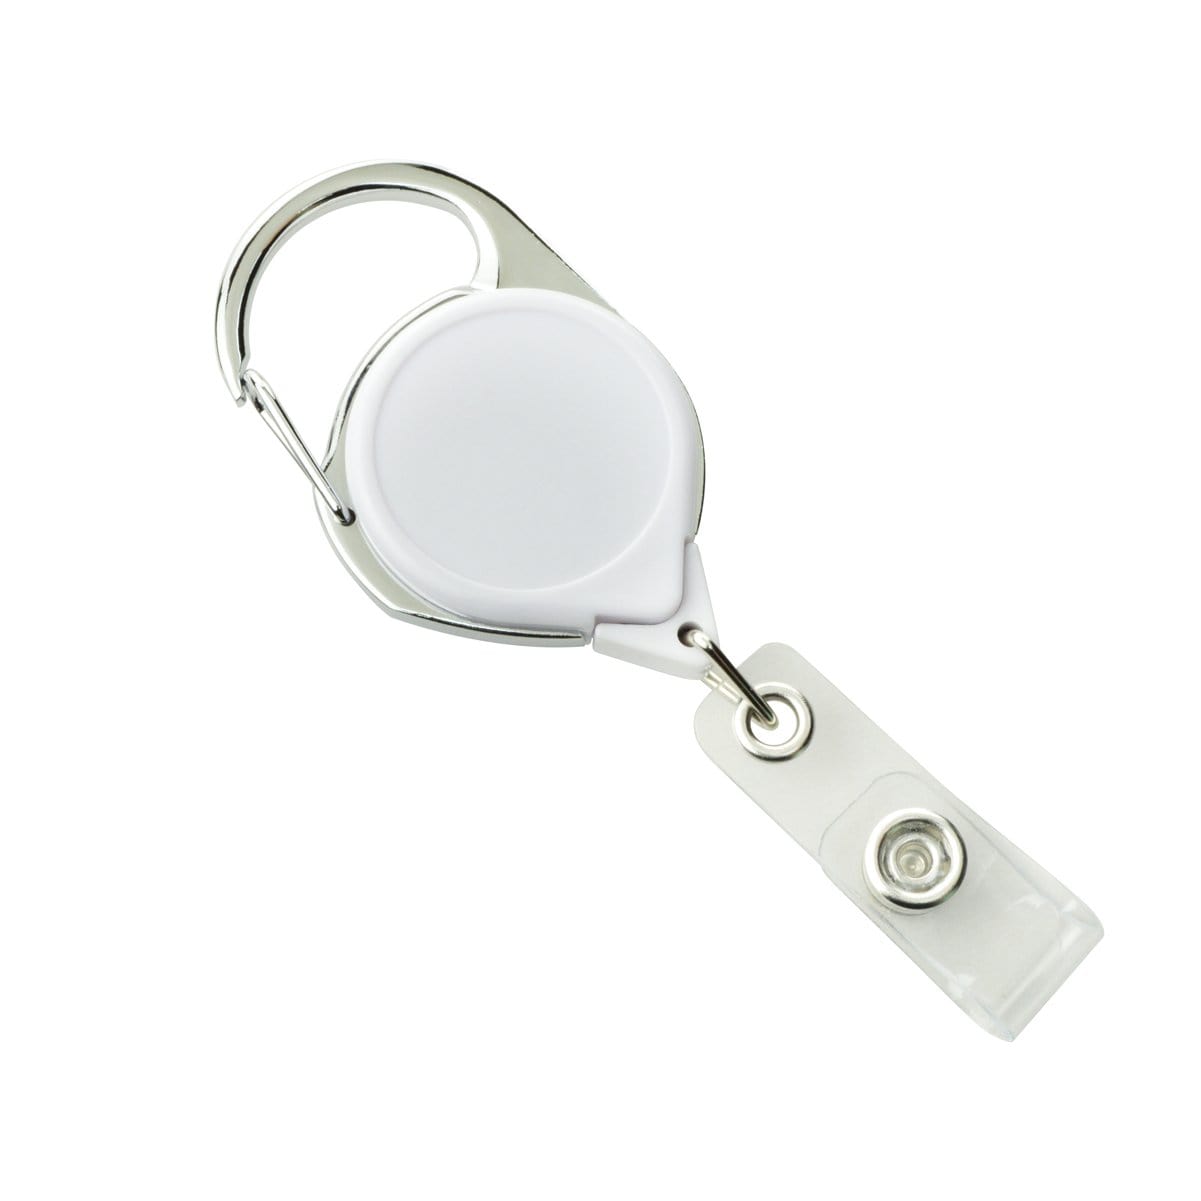 Carabiner Badge Reel With Vinyl Strap and Pressure Release Latch